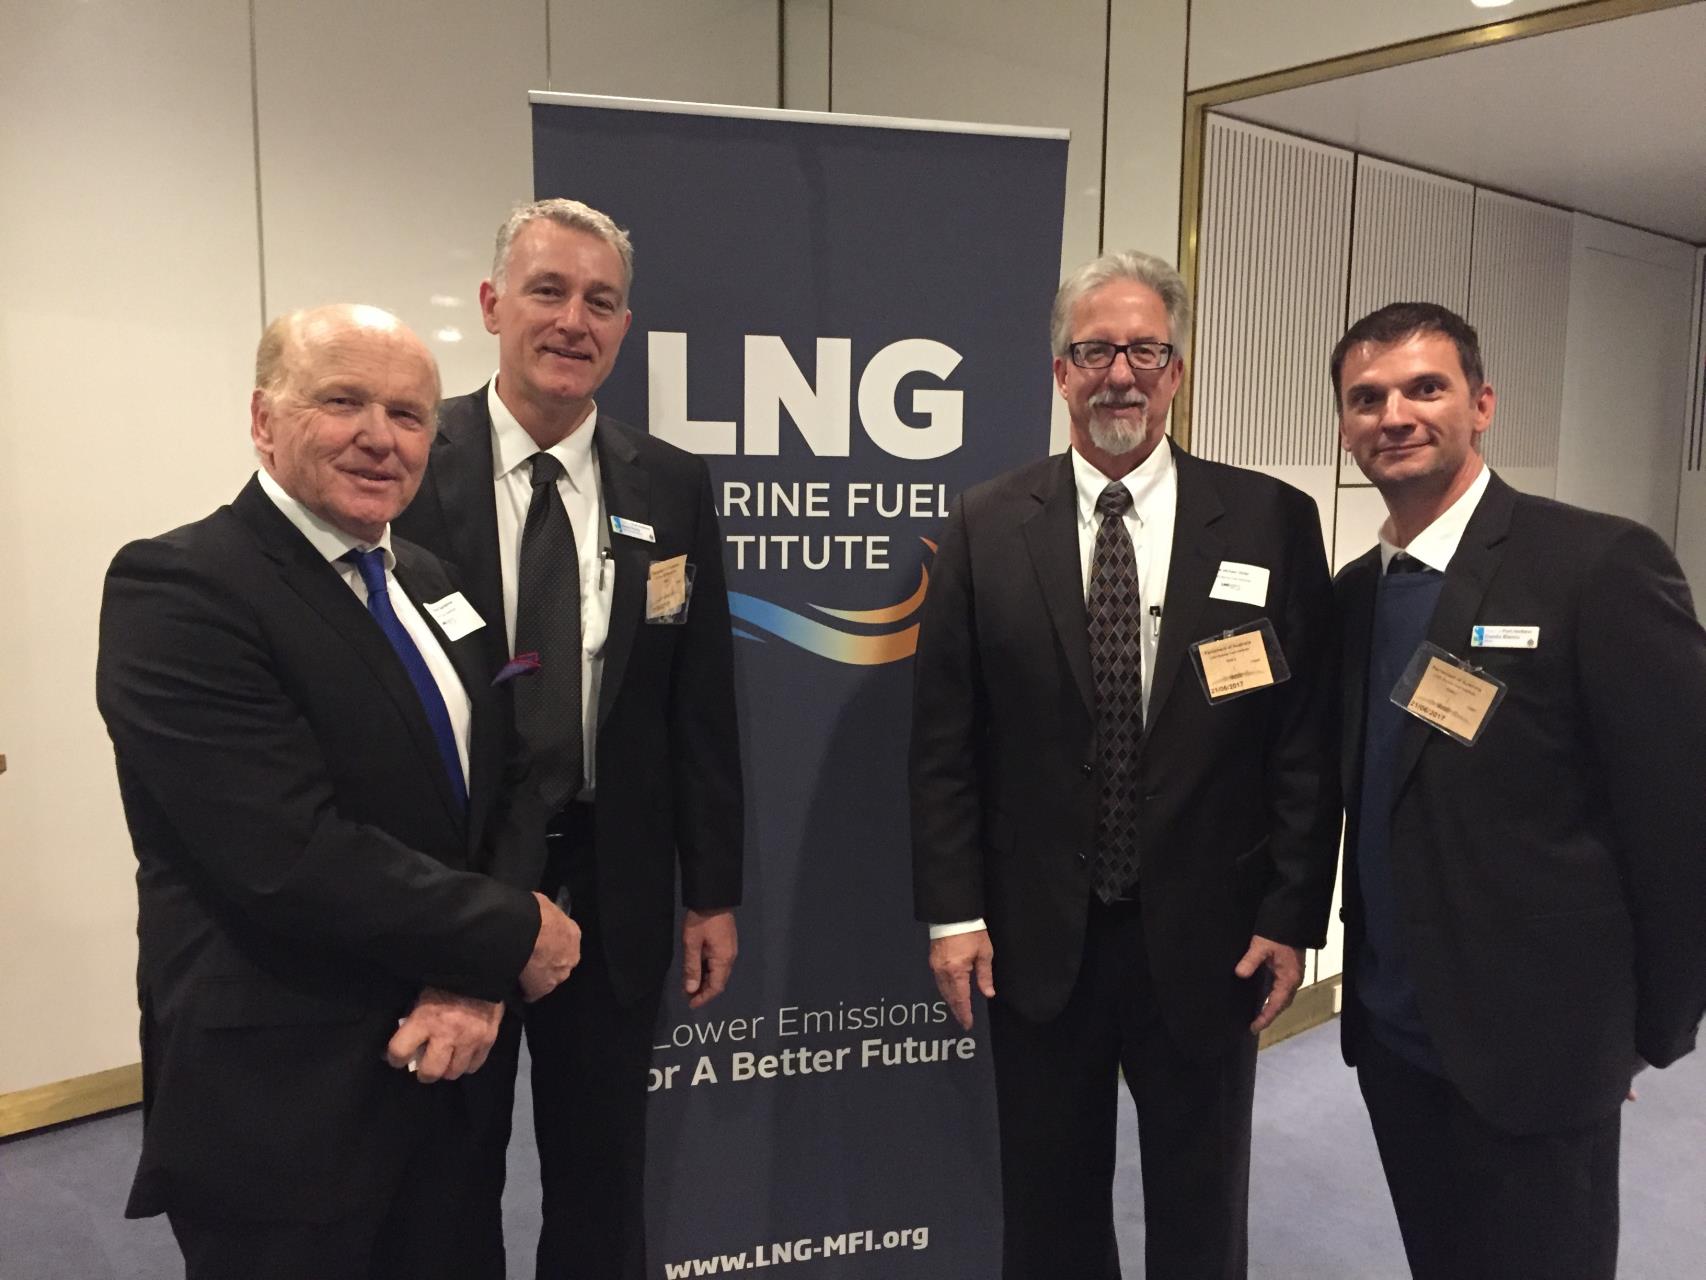 LNG Marine Fuel Institute Launched in Canberra